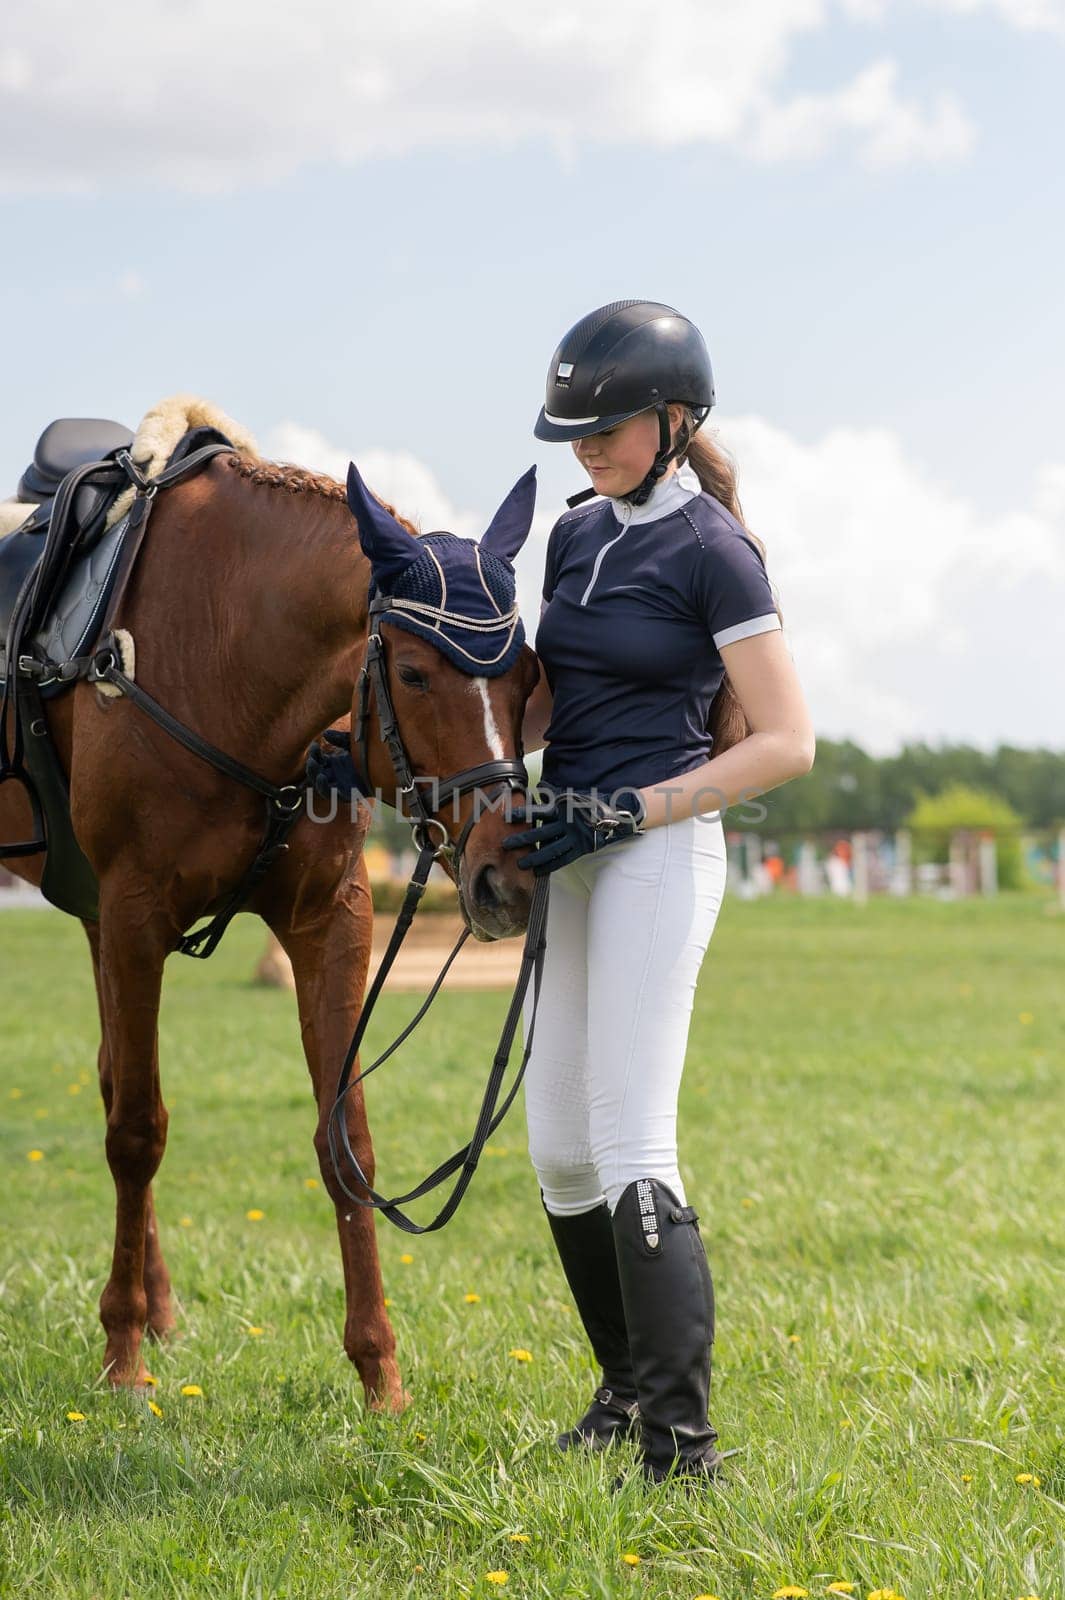 A young girl stands next to a horse before an equestrian competition. Vertical photo